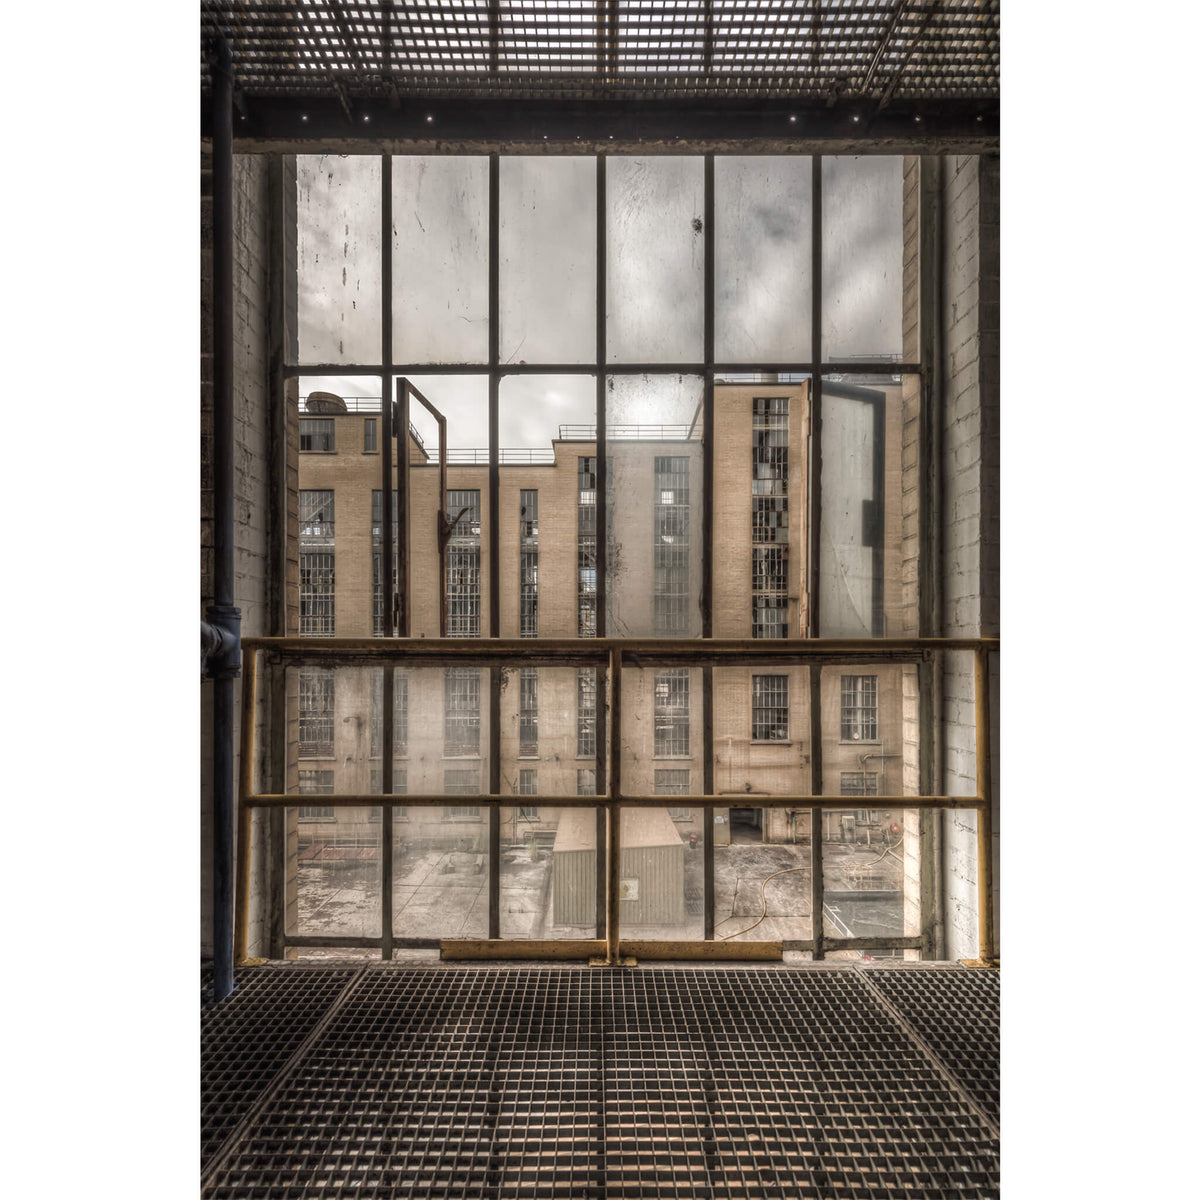 Through the Window | Morwell Power Station